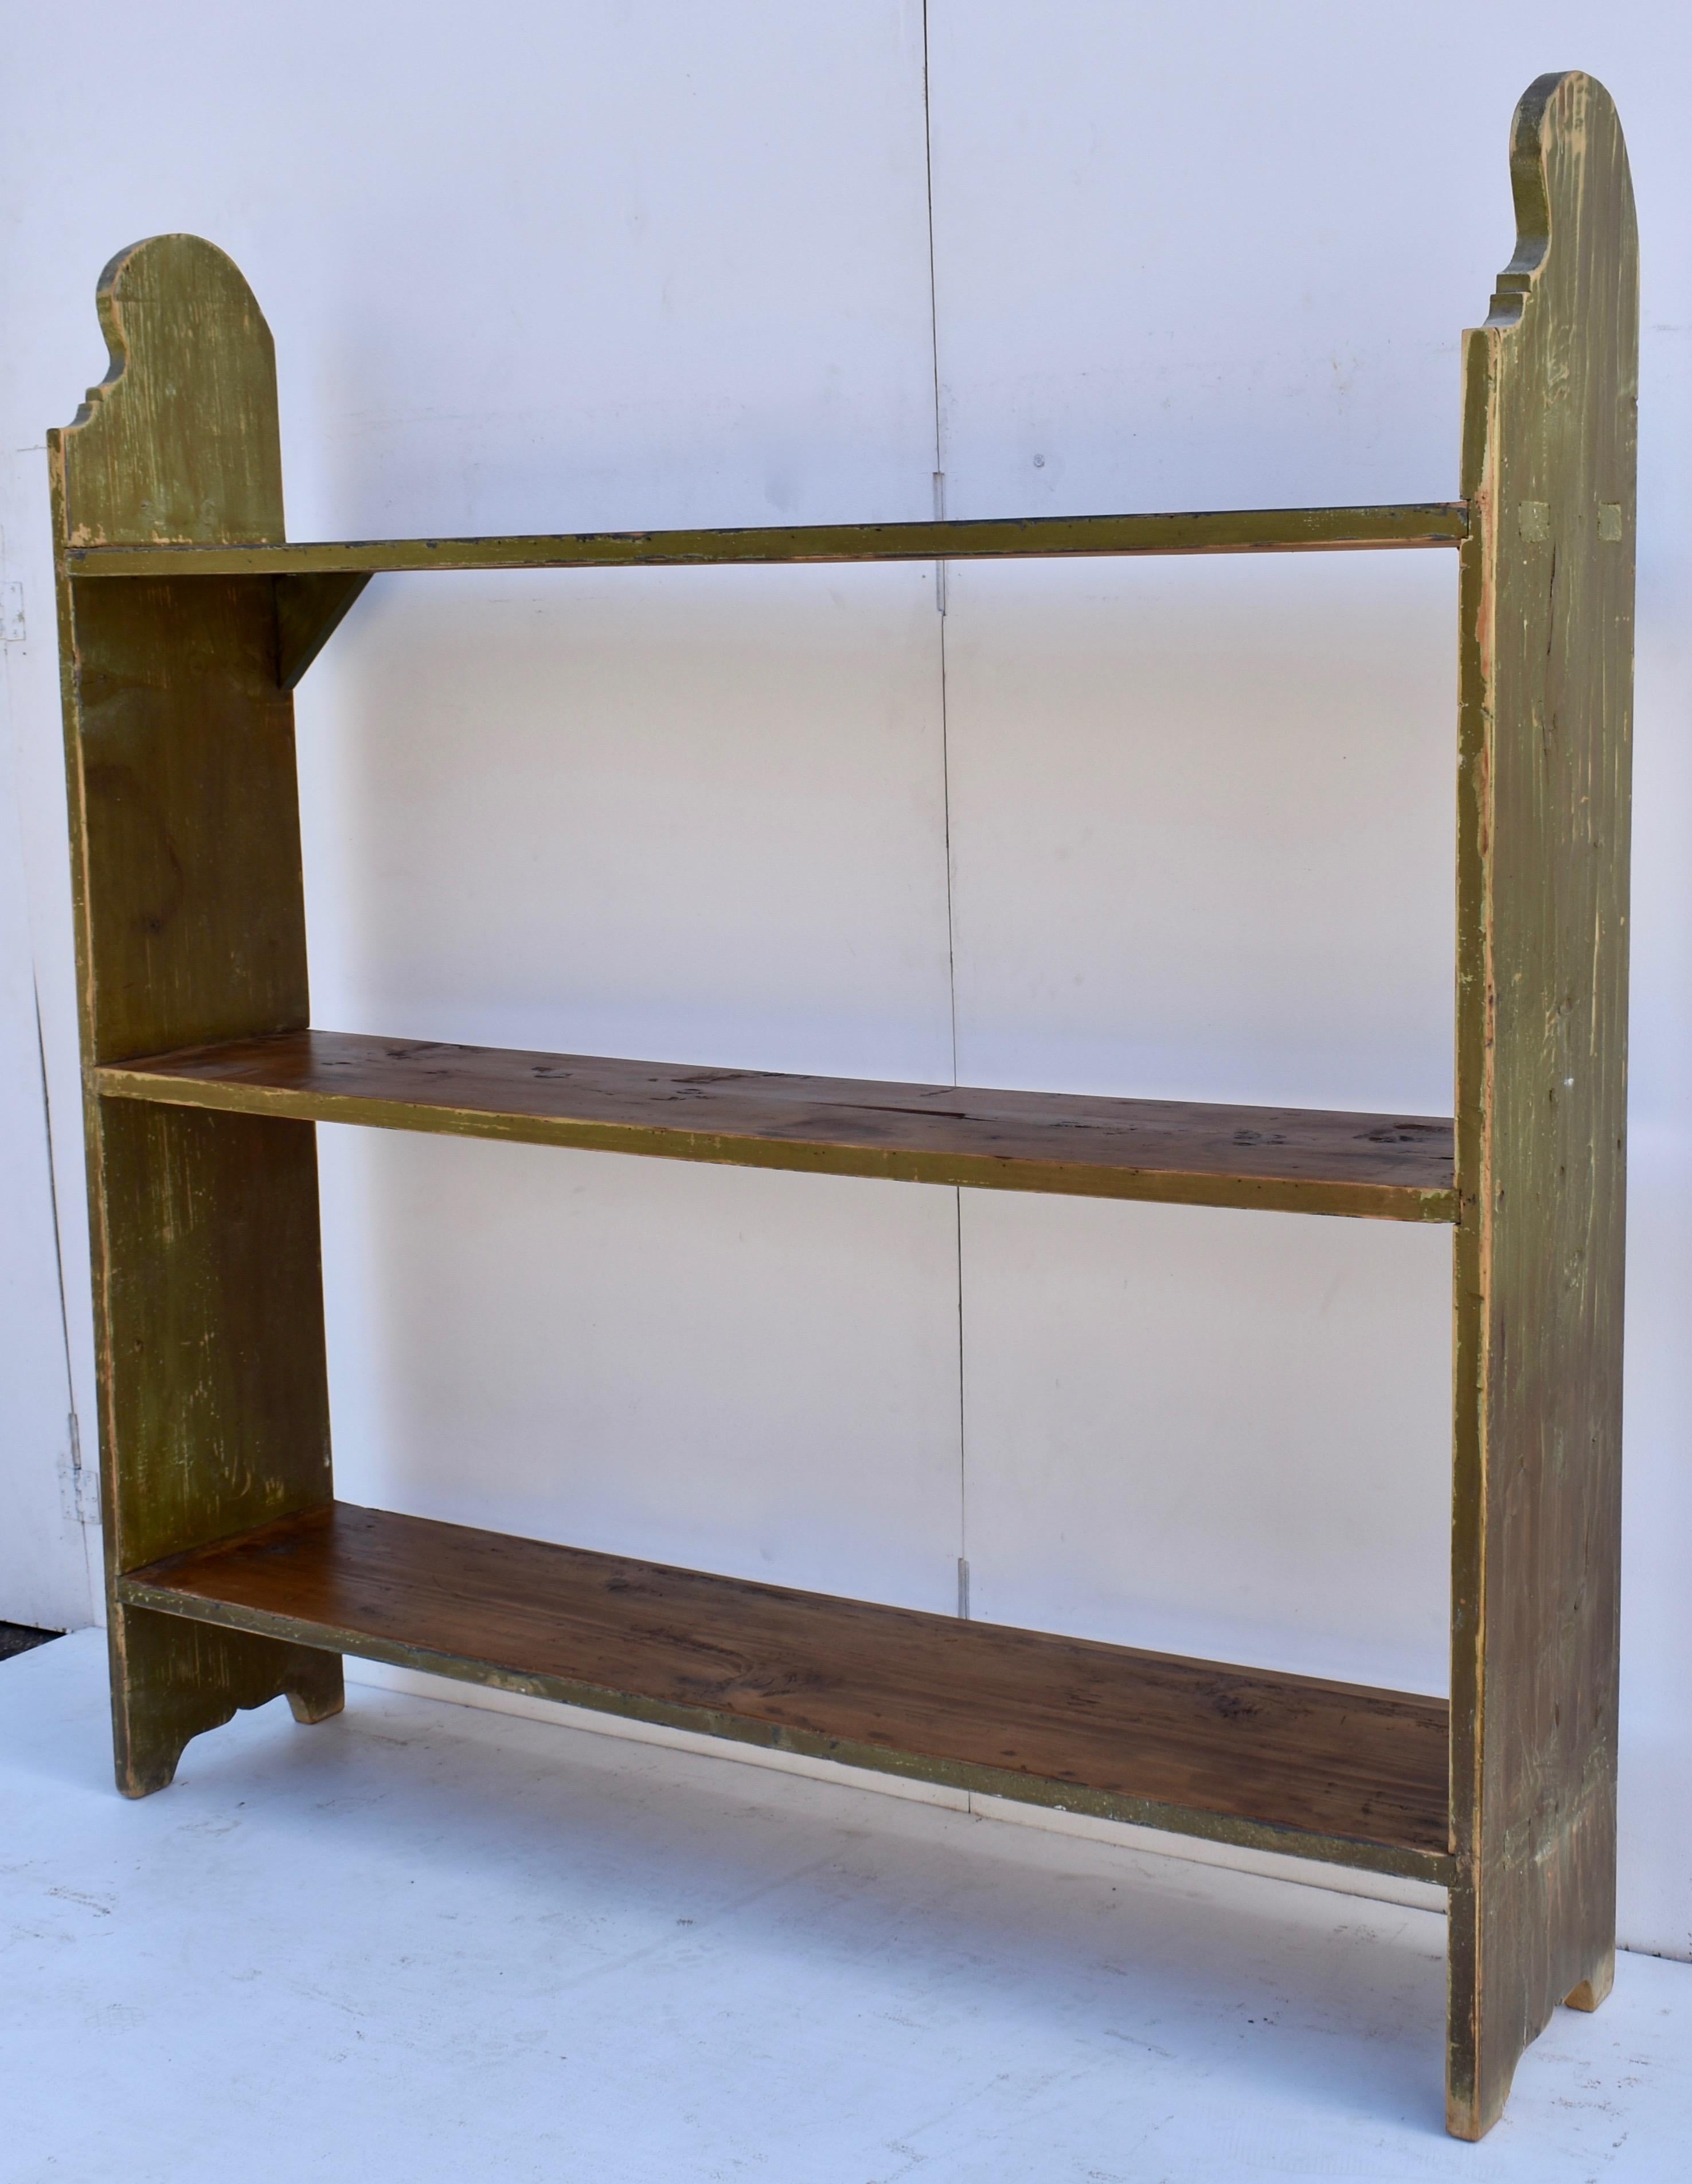 Country Painted Pine Bucket Bench or Utility Shelves For Sale